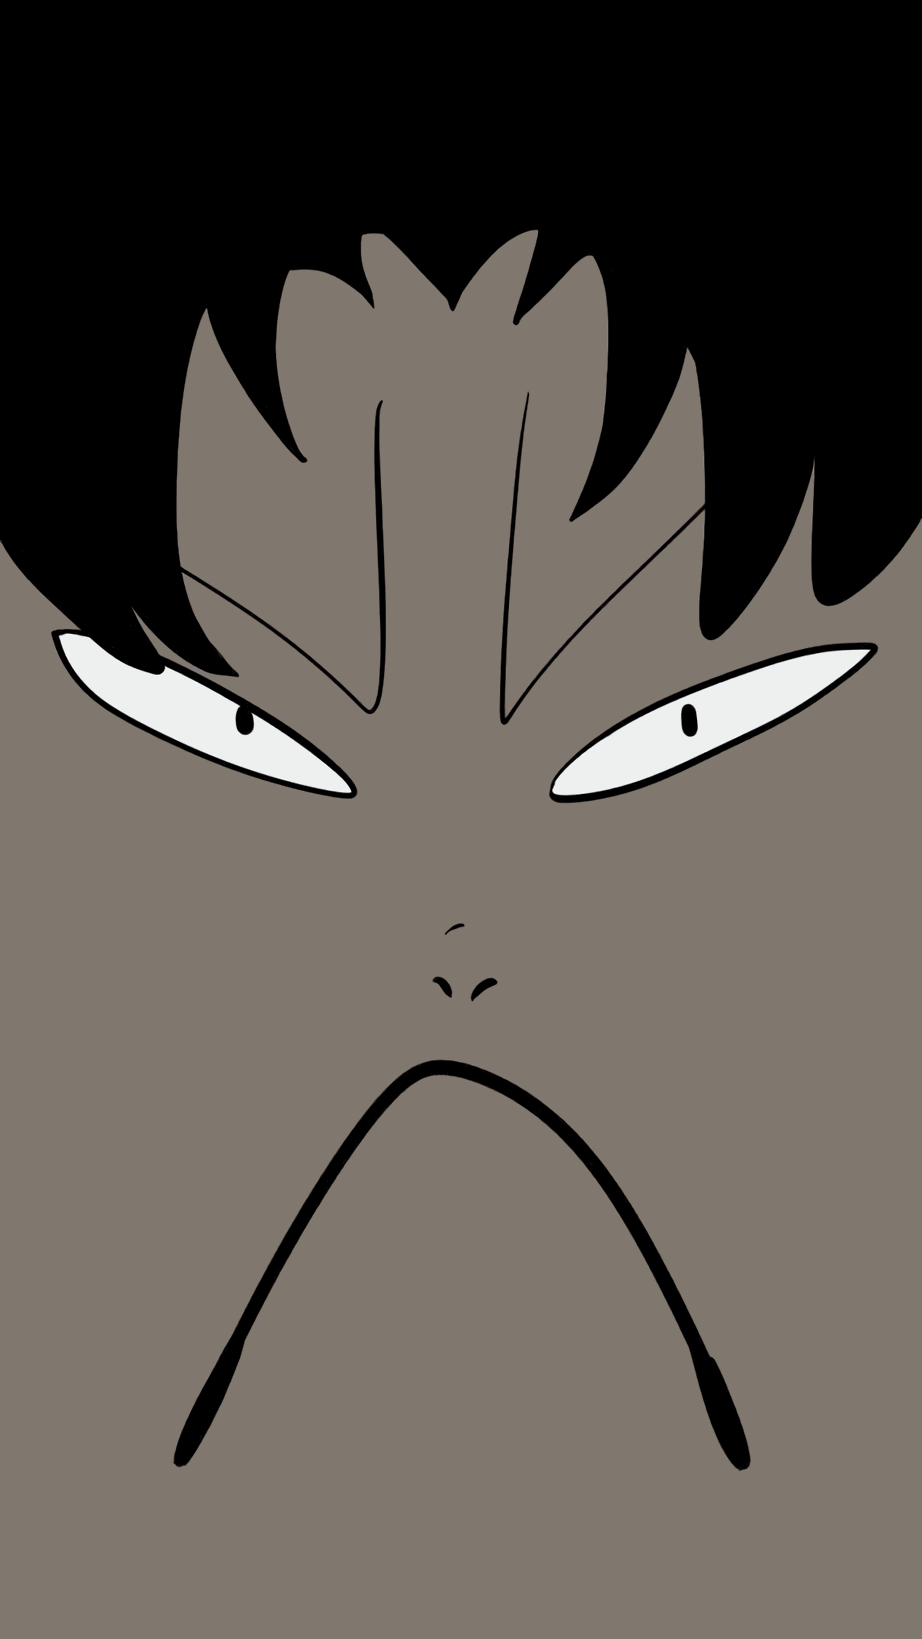 The perfect Devilman Crybaby smartphone wallpaper